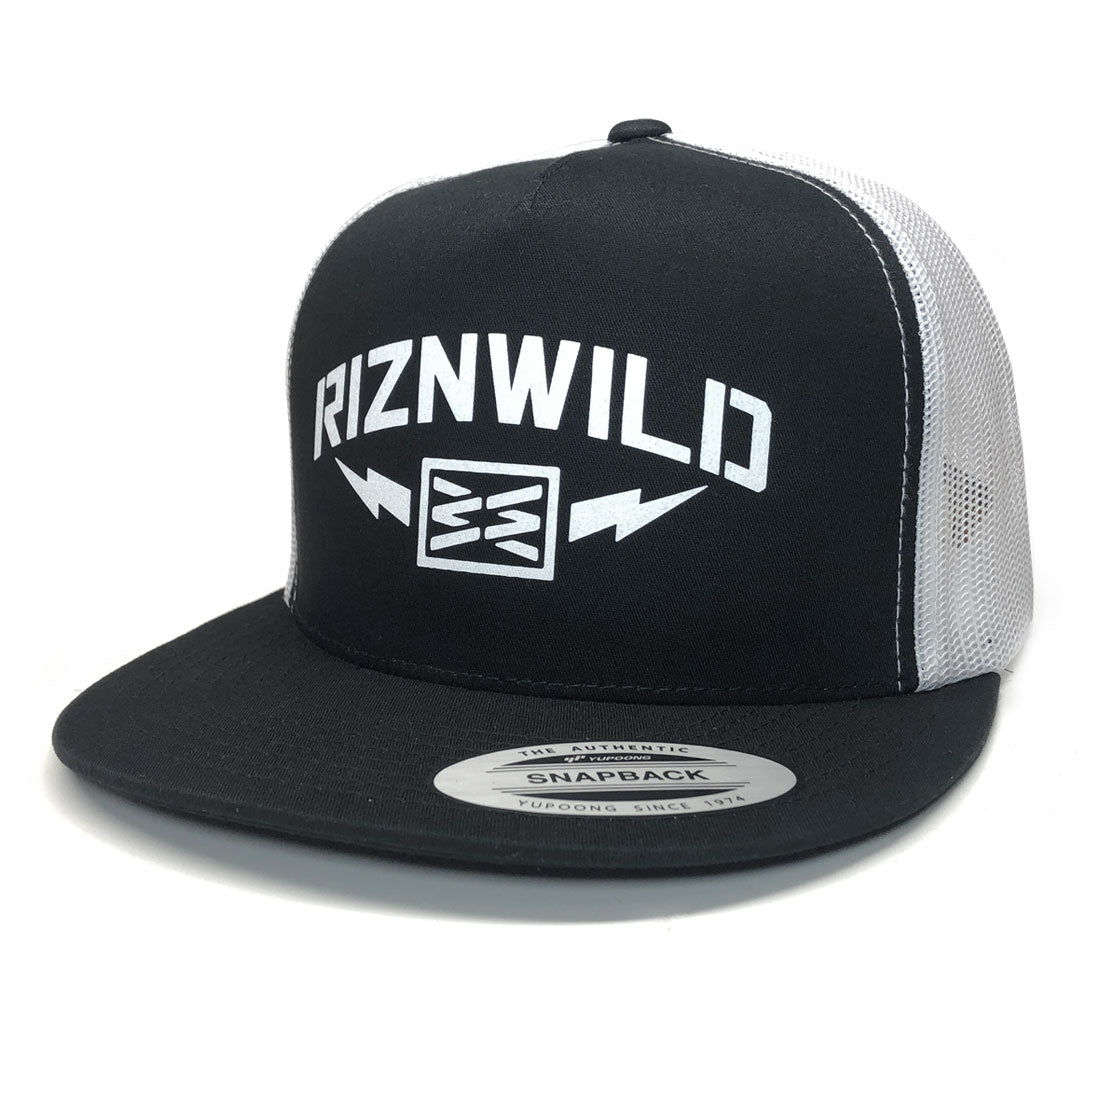 Storm men's flat bill black/white hat with big white RIZNWILD logo on the front.